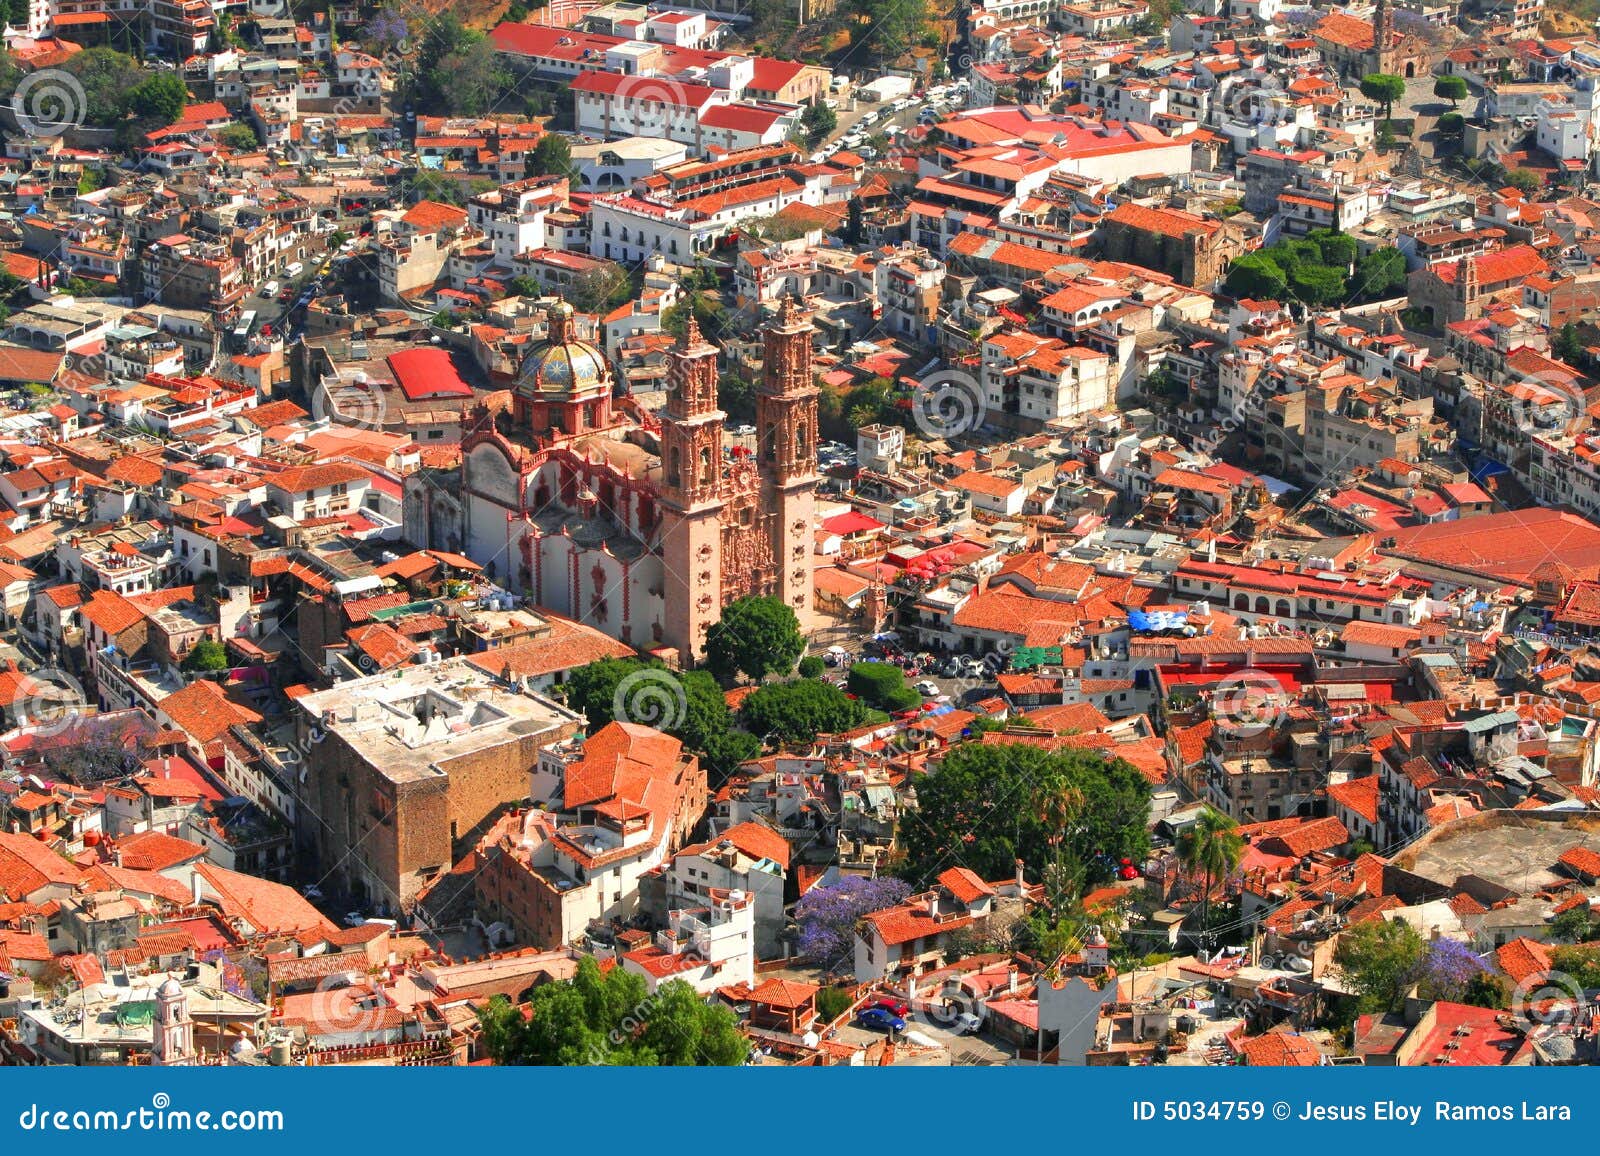 taxco aerial view